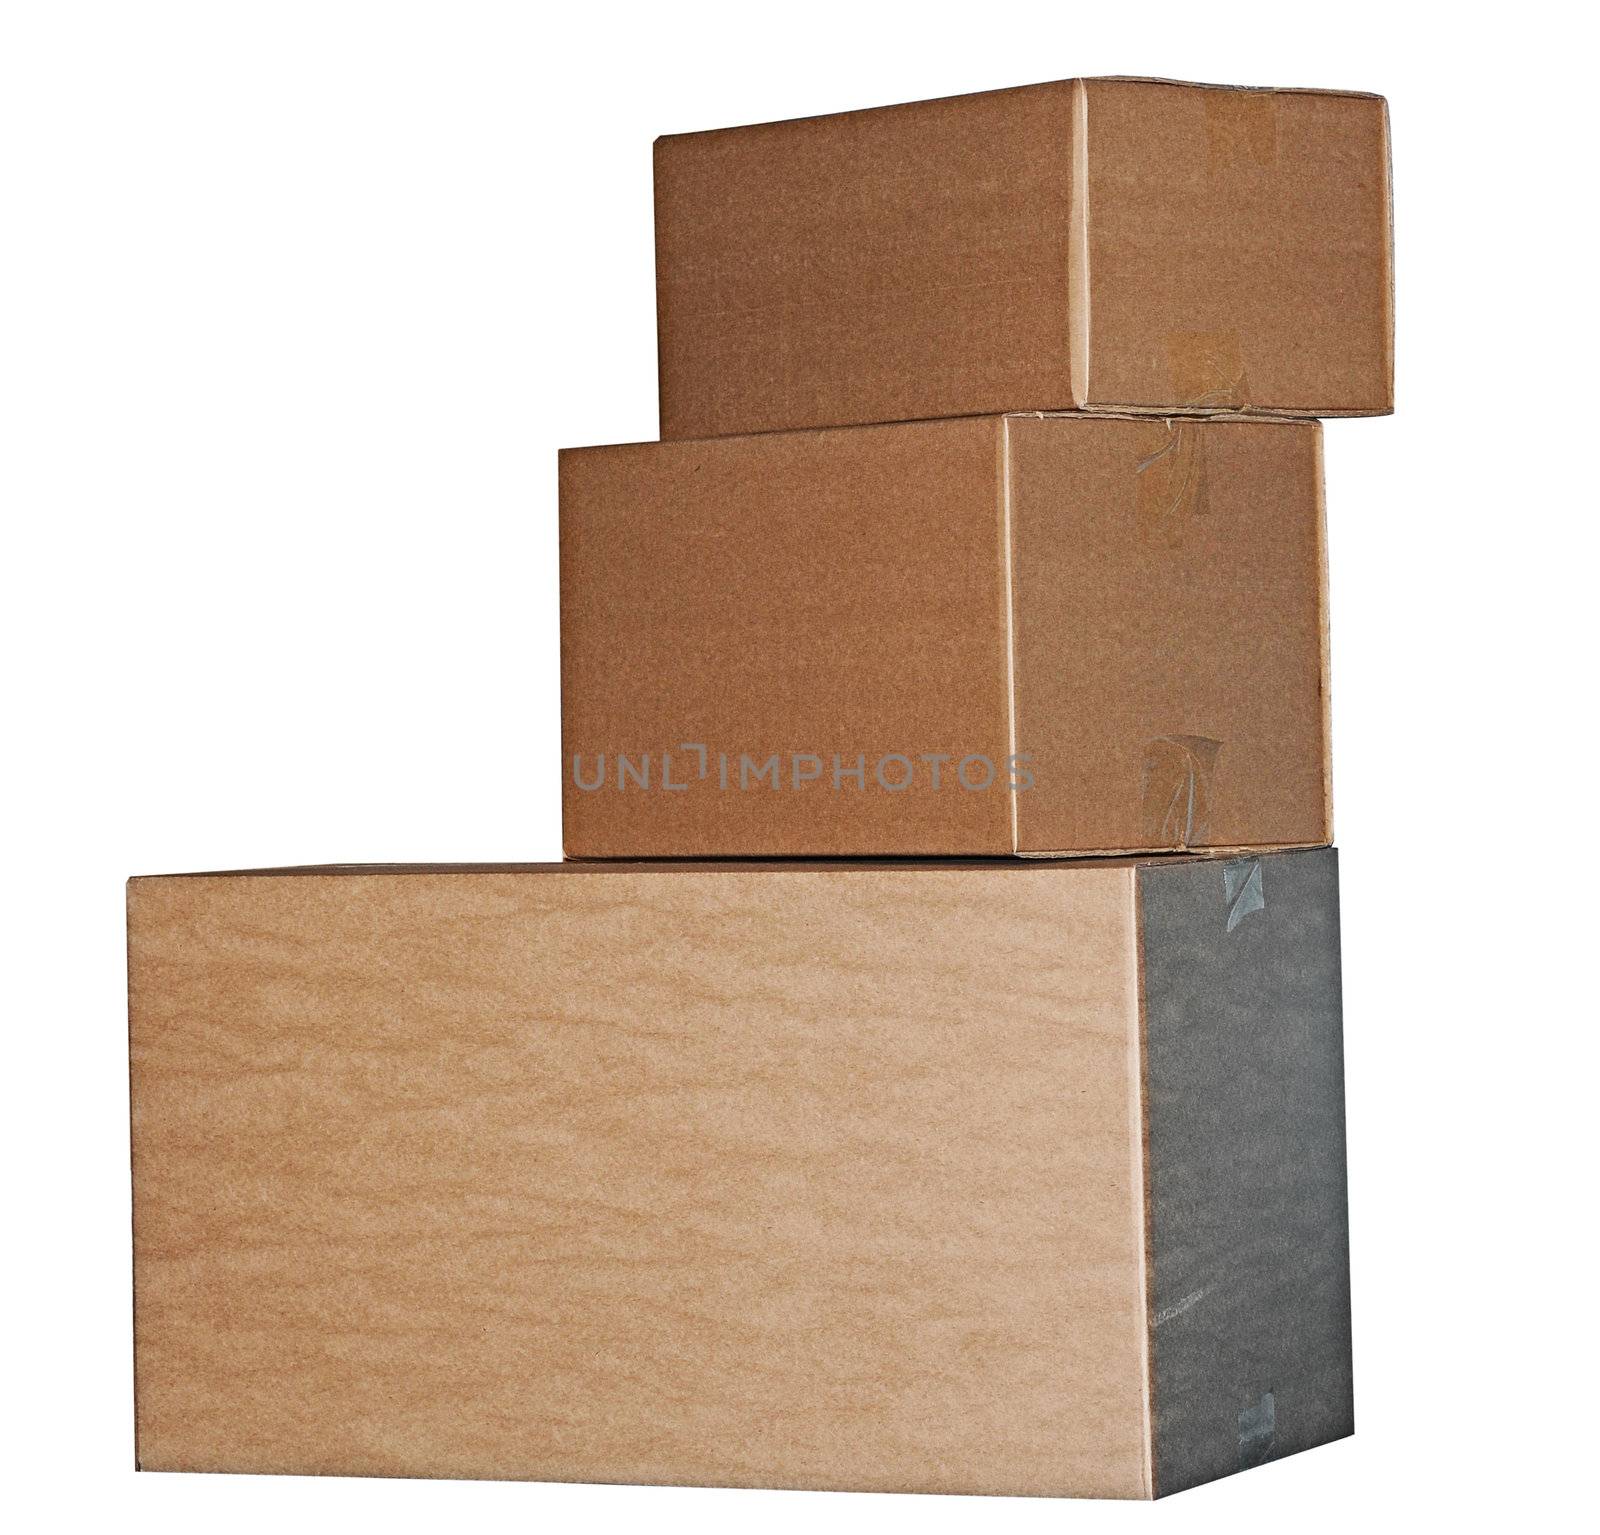 Brown cardboard boxes arranged in stack on white background  by inxti